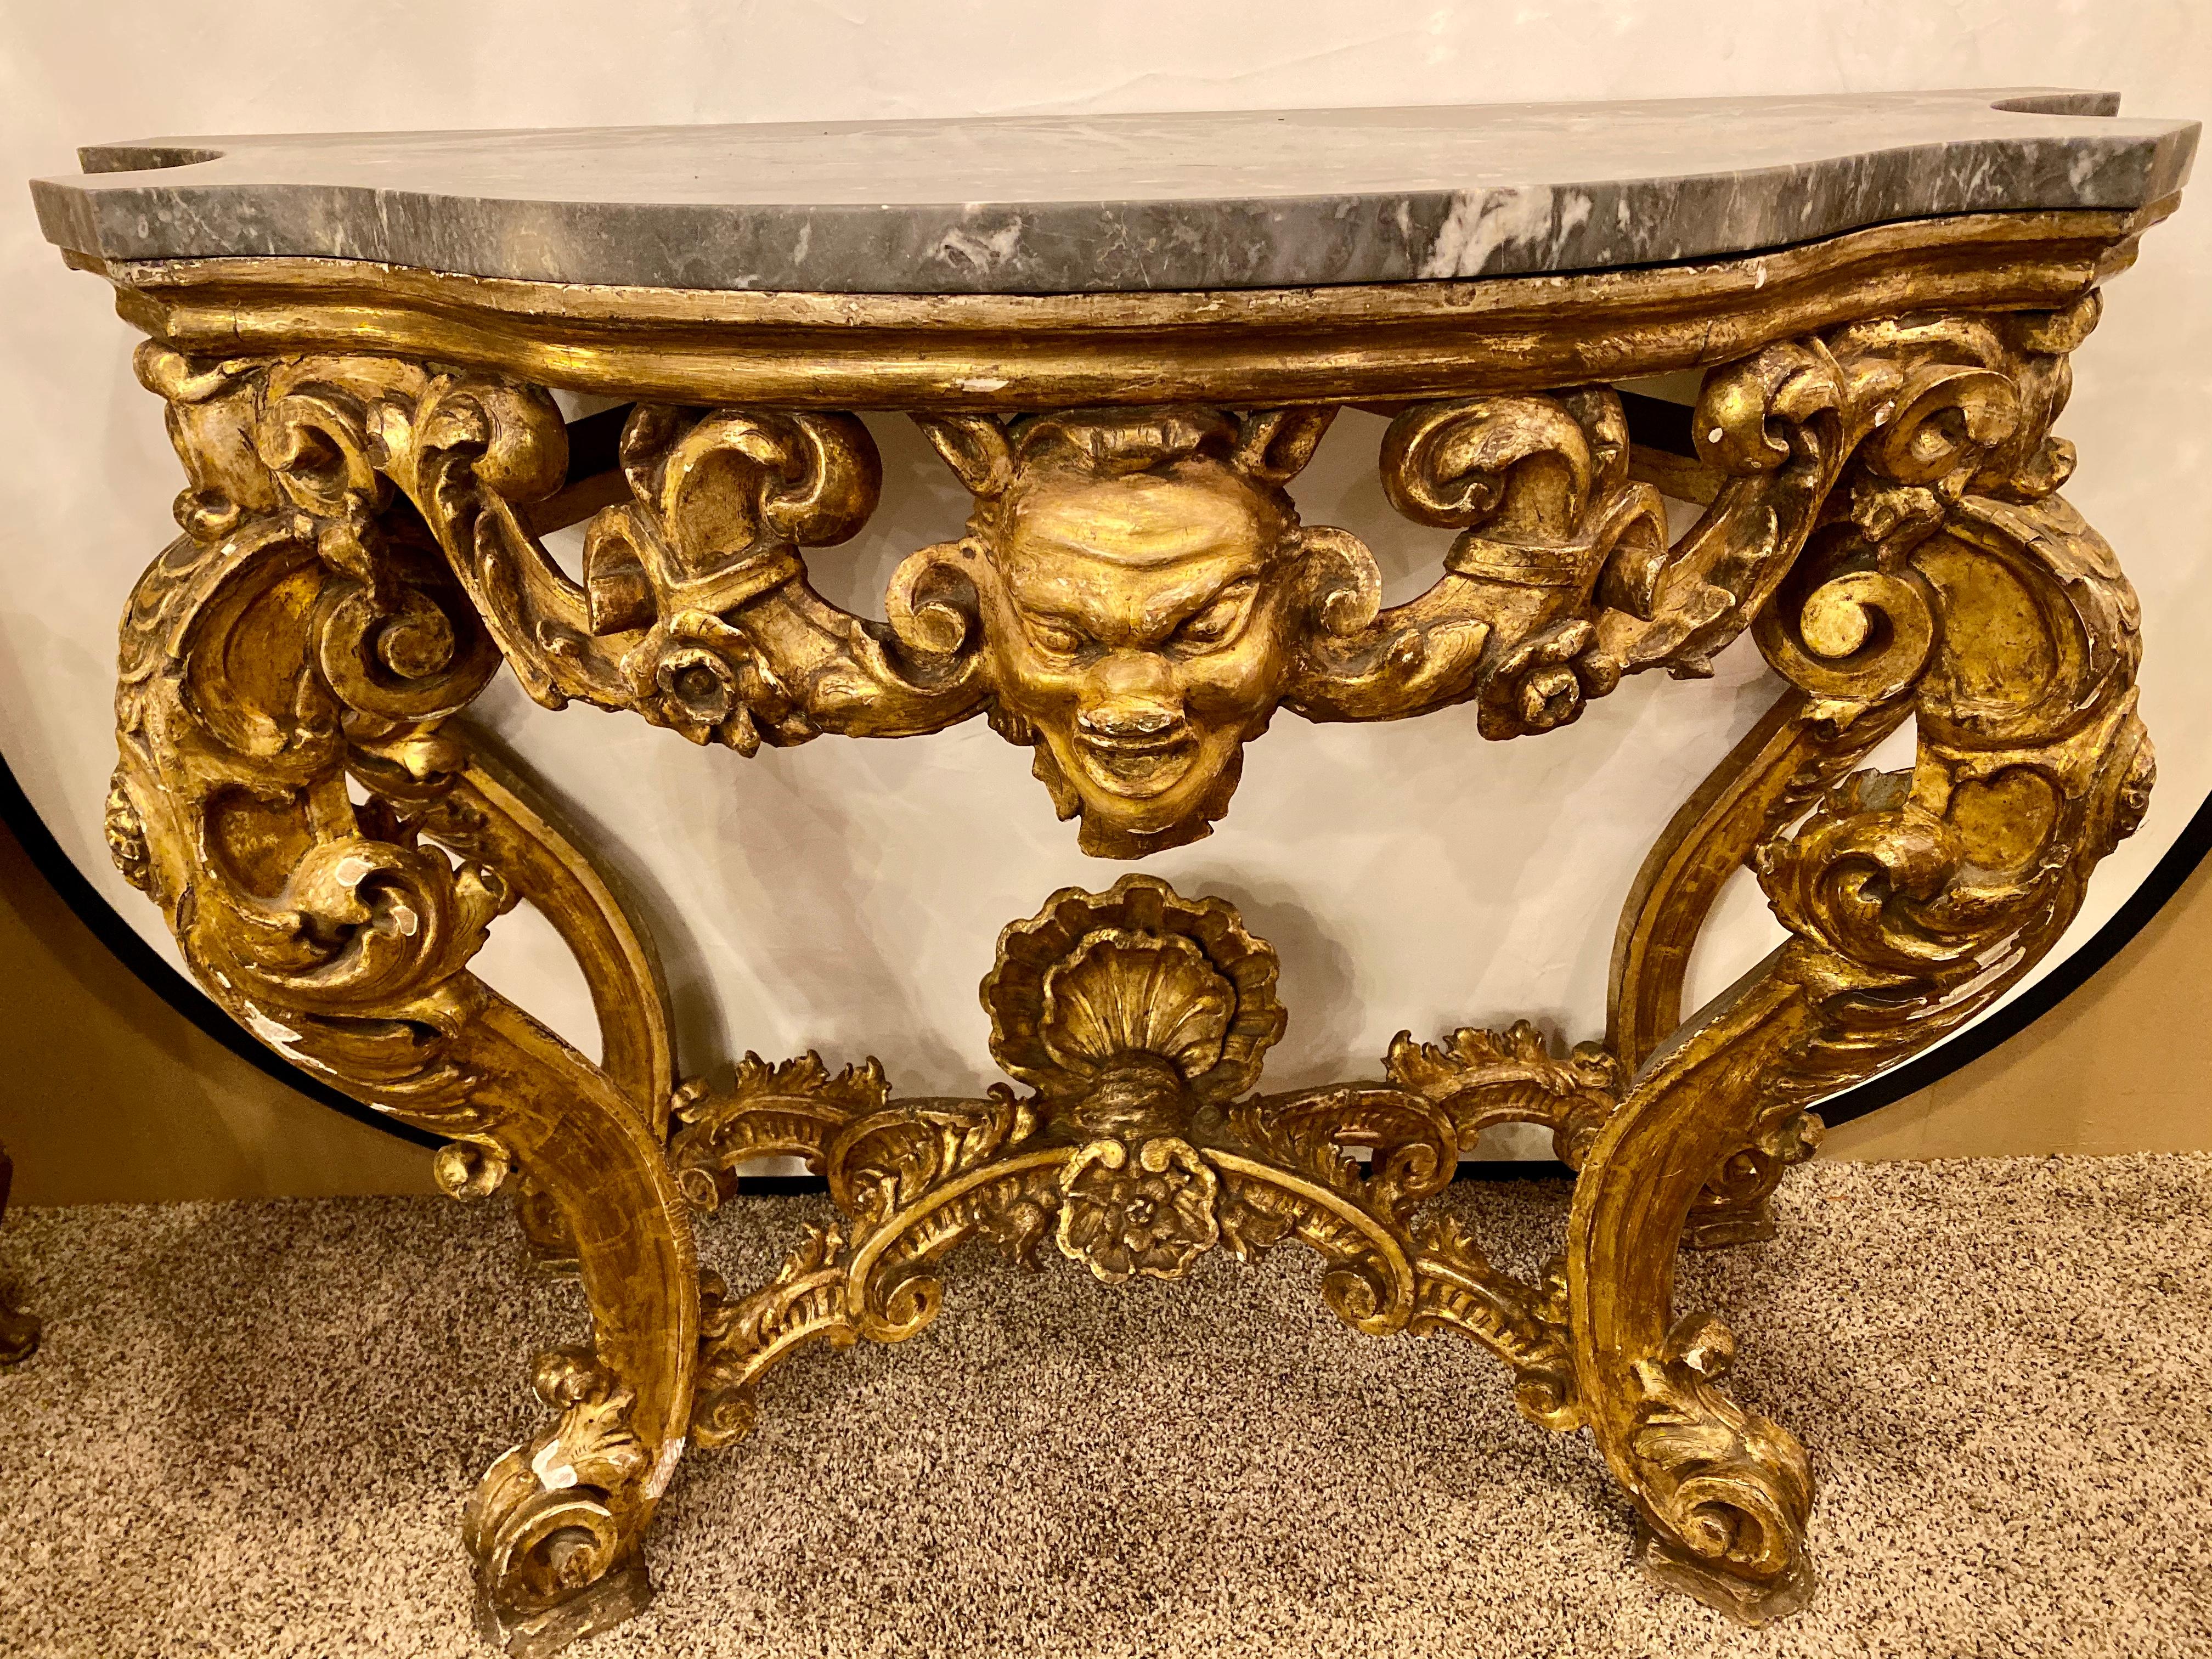 Belle Époque 19th Century Venetian Gilt Gold Console Table, Serpentine, Ornately Carved